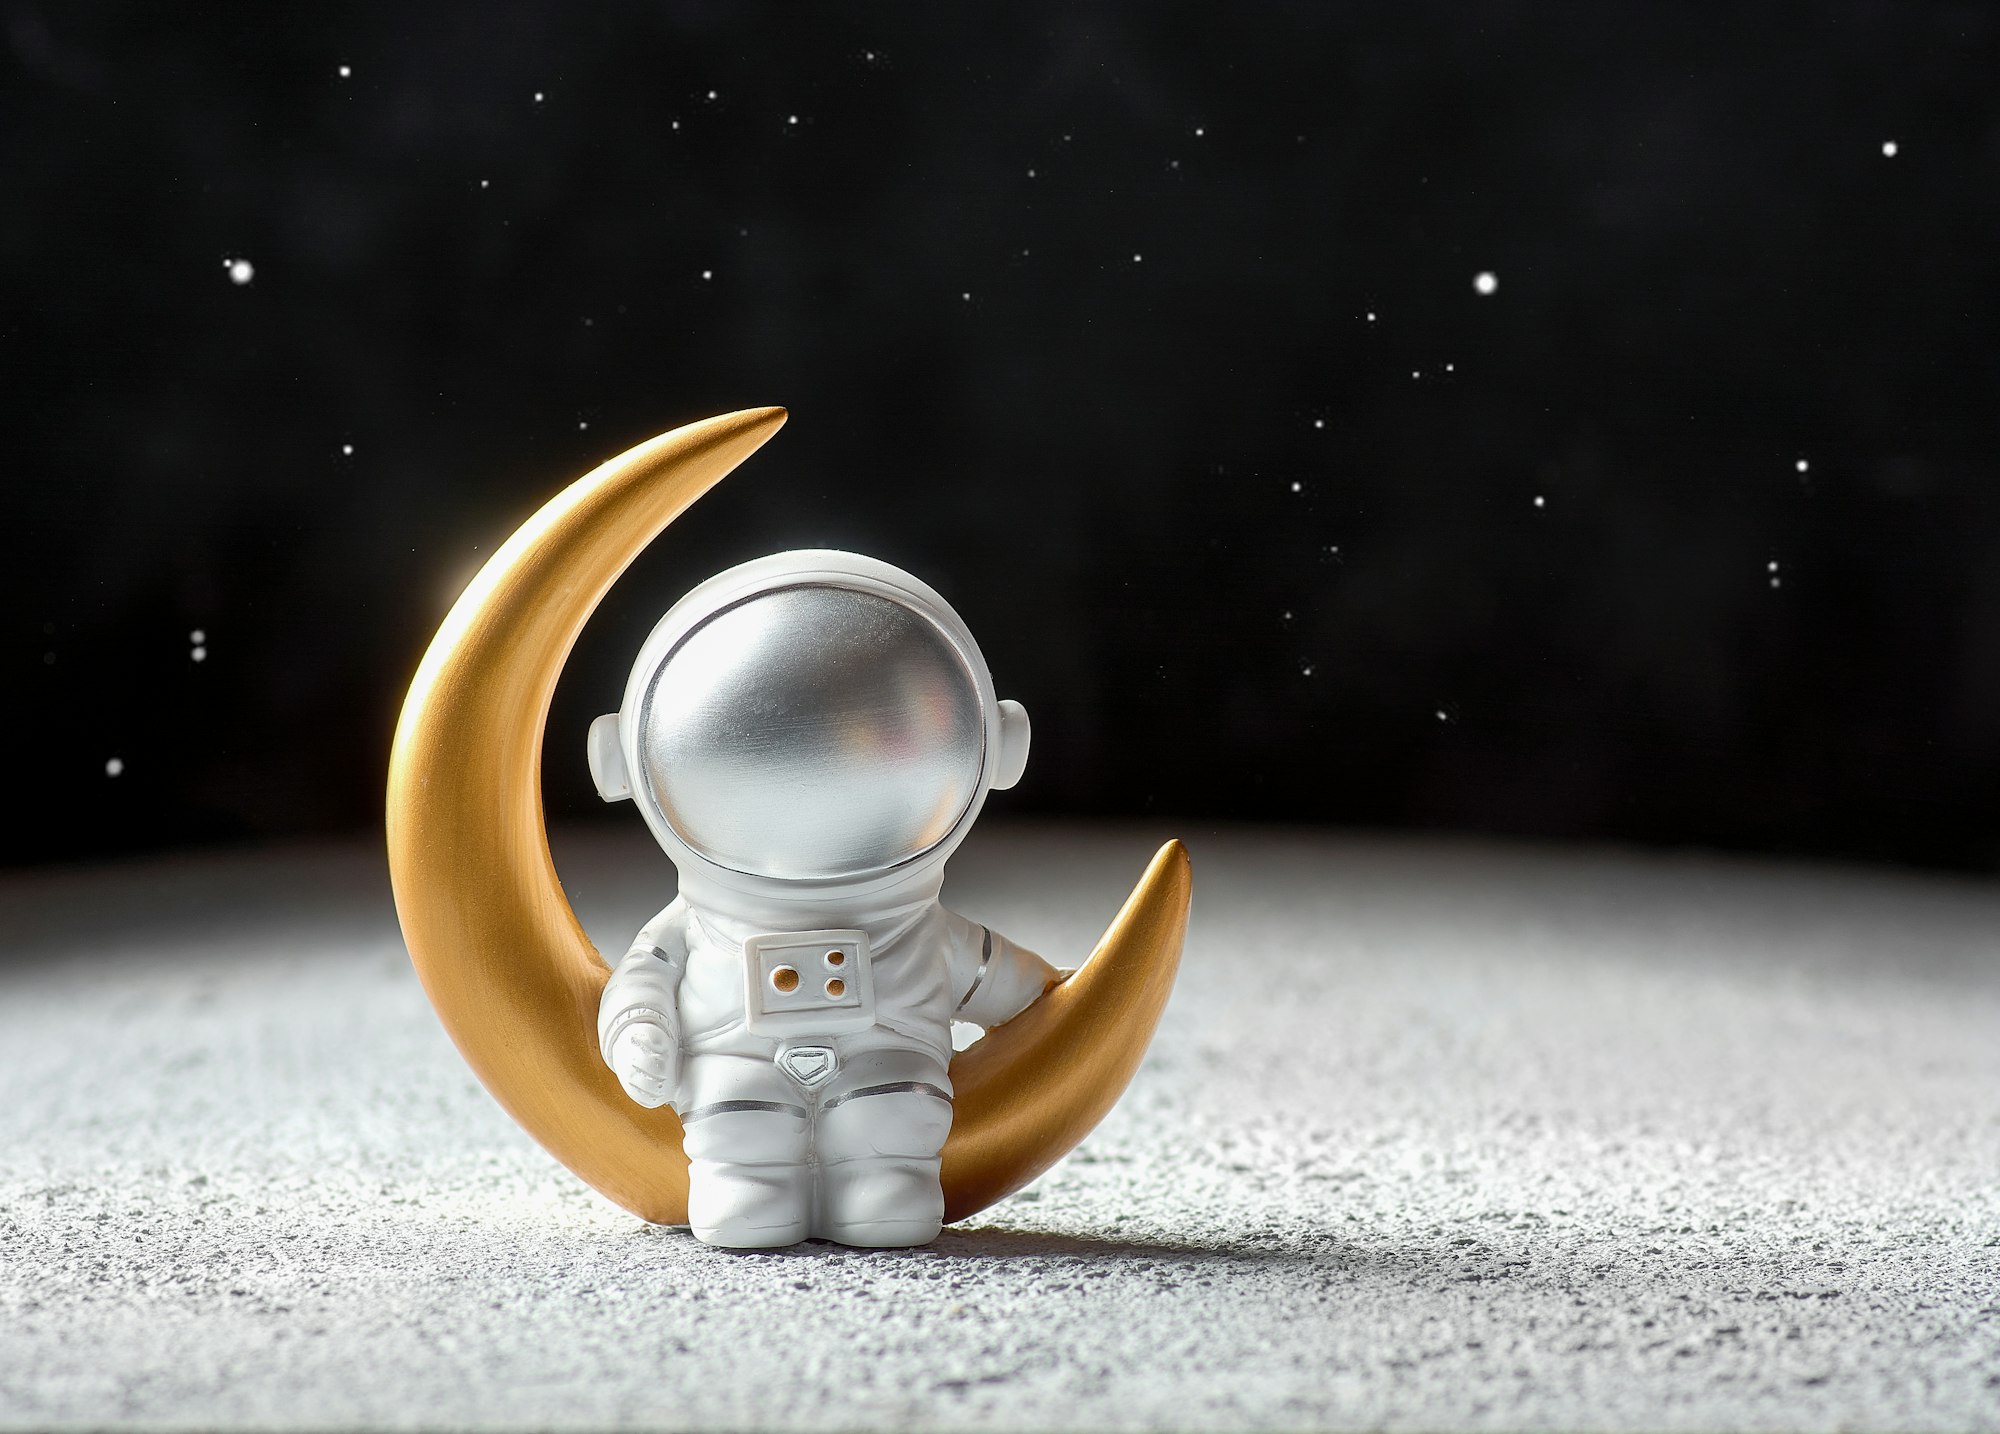 A little astronaut in the moon